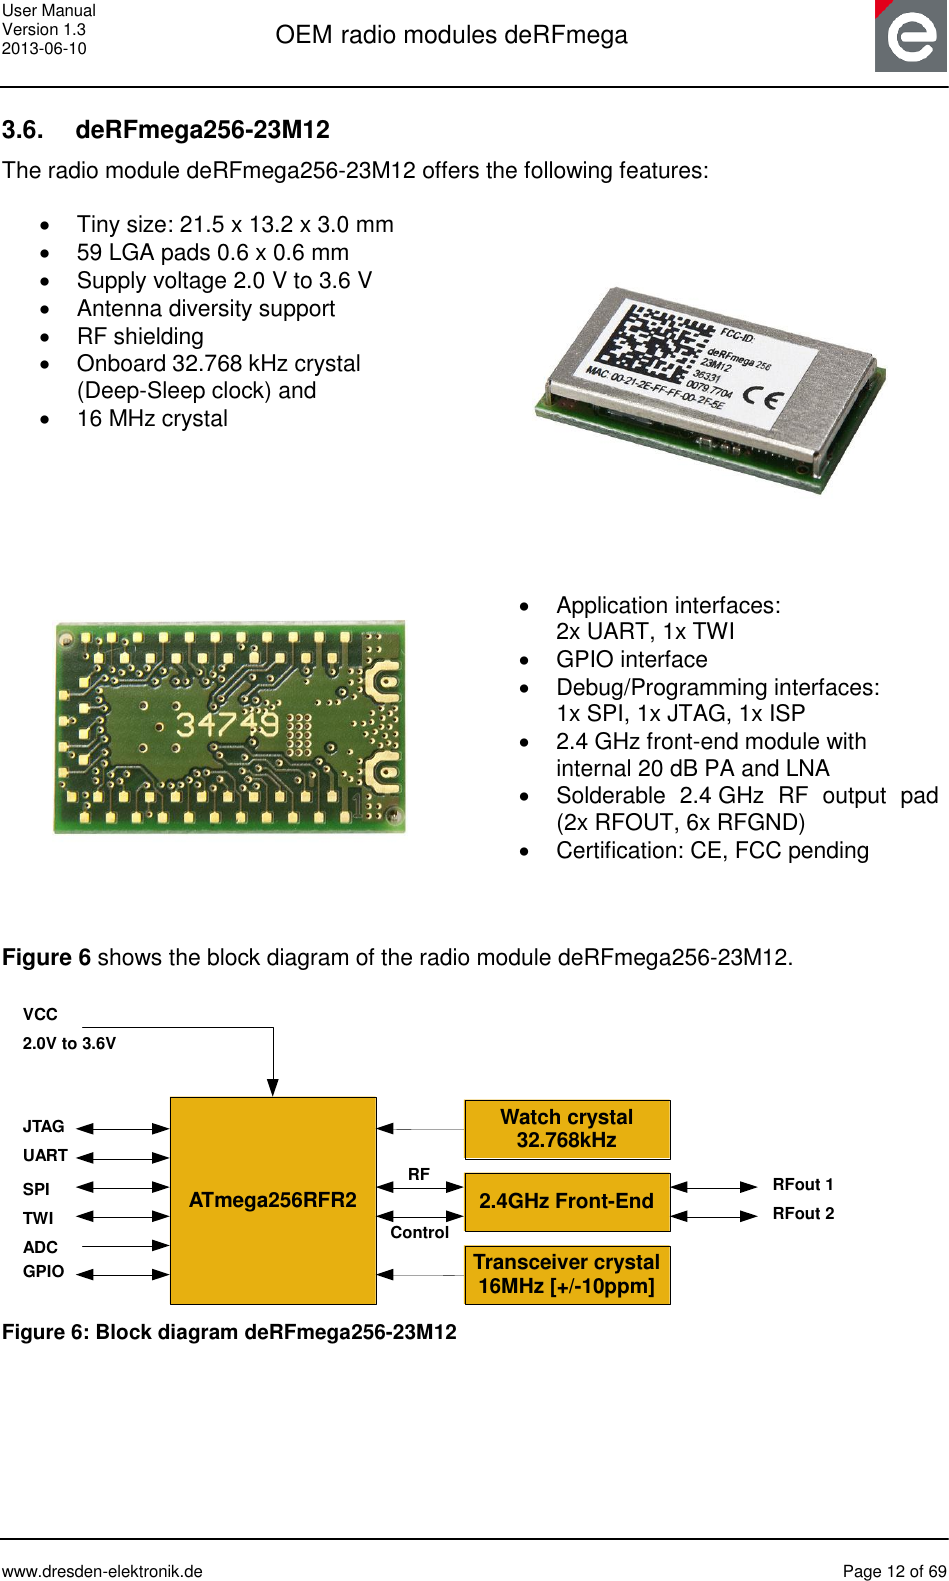 User Manual Version 1.3 2013-06-10  OEM radio modules deRFmega      www.dresden-elektronik.de  Page 12 of 69  3.6.  deRFmega256-23M12 The radio module deRFmega256-23M12 offers the following features:    Tiny size: 21.5 x 13.2 x 3.0 mm  59 LGA pads 0.6 x 0.6 mm   Supply voltage 2.0 V to 3.6 V   Antenna diversity support   RF shielding   Onboard 32.768 kHz crystal  (Deep-Sleep clock) and   16 MHz crystal      Application interfaces:  2x UART, 1x TWI   GPIO interface  Debug/Programming interfaces:  1x SPI, 1x JTAG, 1x ISP   2.4 GHz front-end module with  internal 20 dB PA and LNA   Solderable  2.4 GHz  RF  output  pad (2x RFOUT, 6x RFGND)  Certification: CE, FCC pending   Figure 6 shows the block diagram of the radio module deRFmega256-23M12.   ATmega256RFR2Transceiver crystal16MHz [+/-10ppm]JTAGUARTVCC2.0V to 3.6VWatch crystal32.768kHzSPITWIADCGPIO2.4GHz Front-End RFout 1RFout 2RFControl Figure 6: Block diagram deRFmega256-23M12   